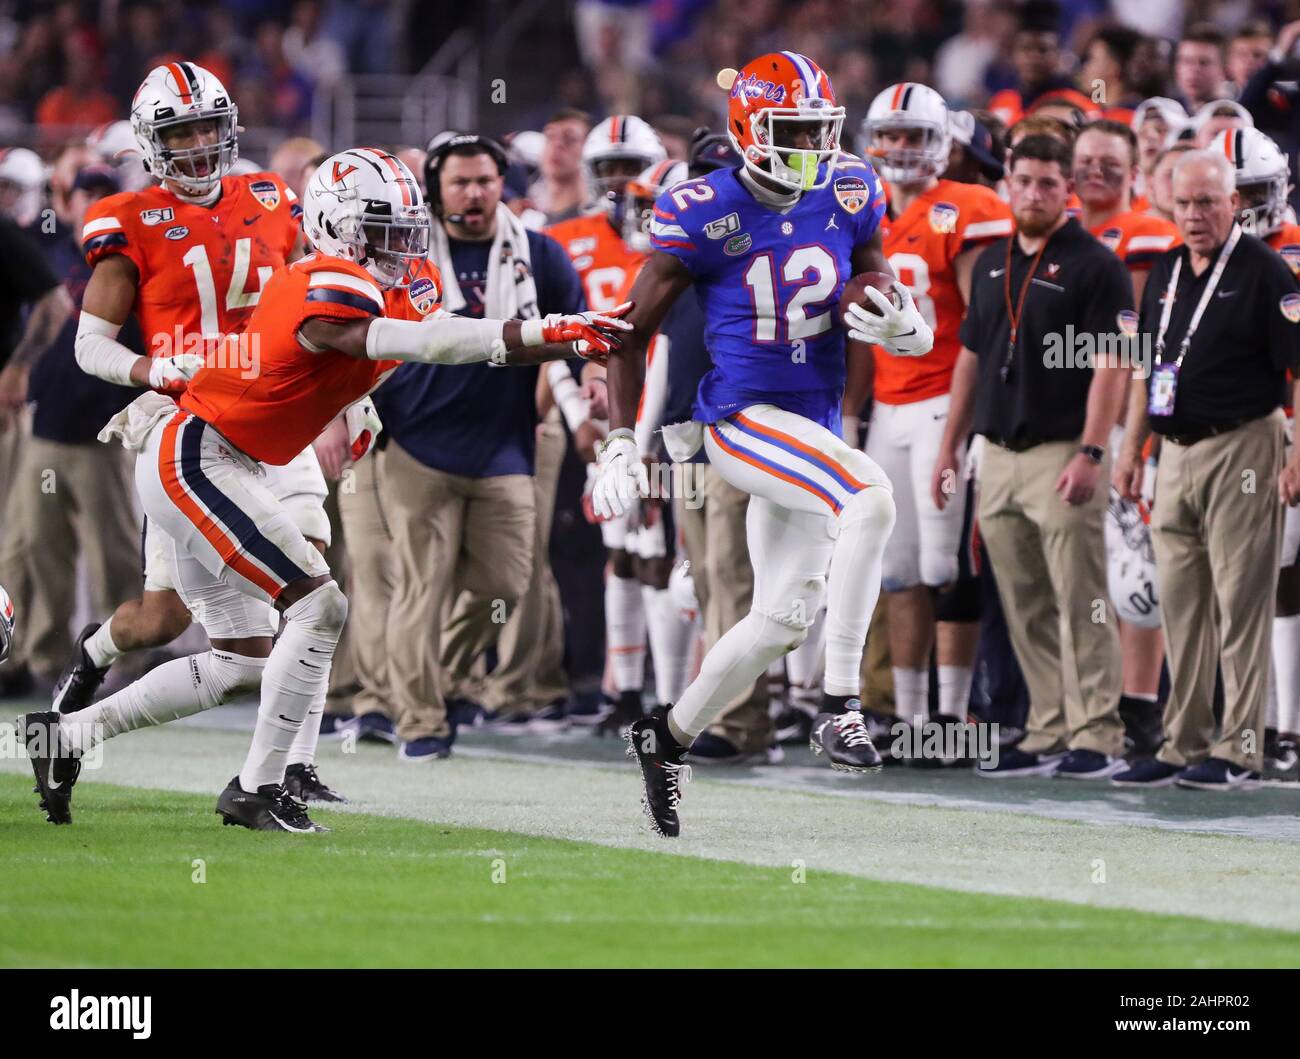 Miami Gardens, Florida, USA. 30th Dec, 2019. Florida Gators wide receiver Van Jefferson (12) running with the ball is pushed out-of-bounce by Virginia Cavaliers cornerback Nick Grant (1), left, during the Capital One Orange Bowl - NCAA Football game at the Hard Rock Stadium in Miami Gardens, Florida. Florida defeated Virginia 36-28. Mario Houben/CSM/Alamy Live News Stock Photo